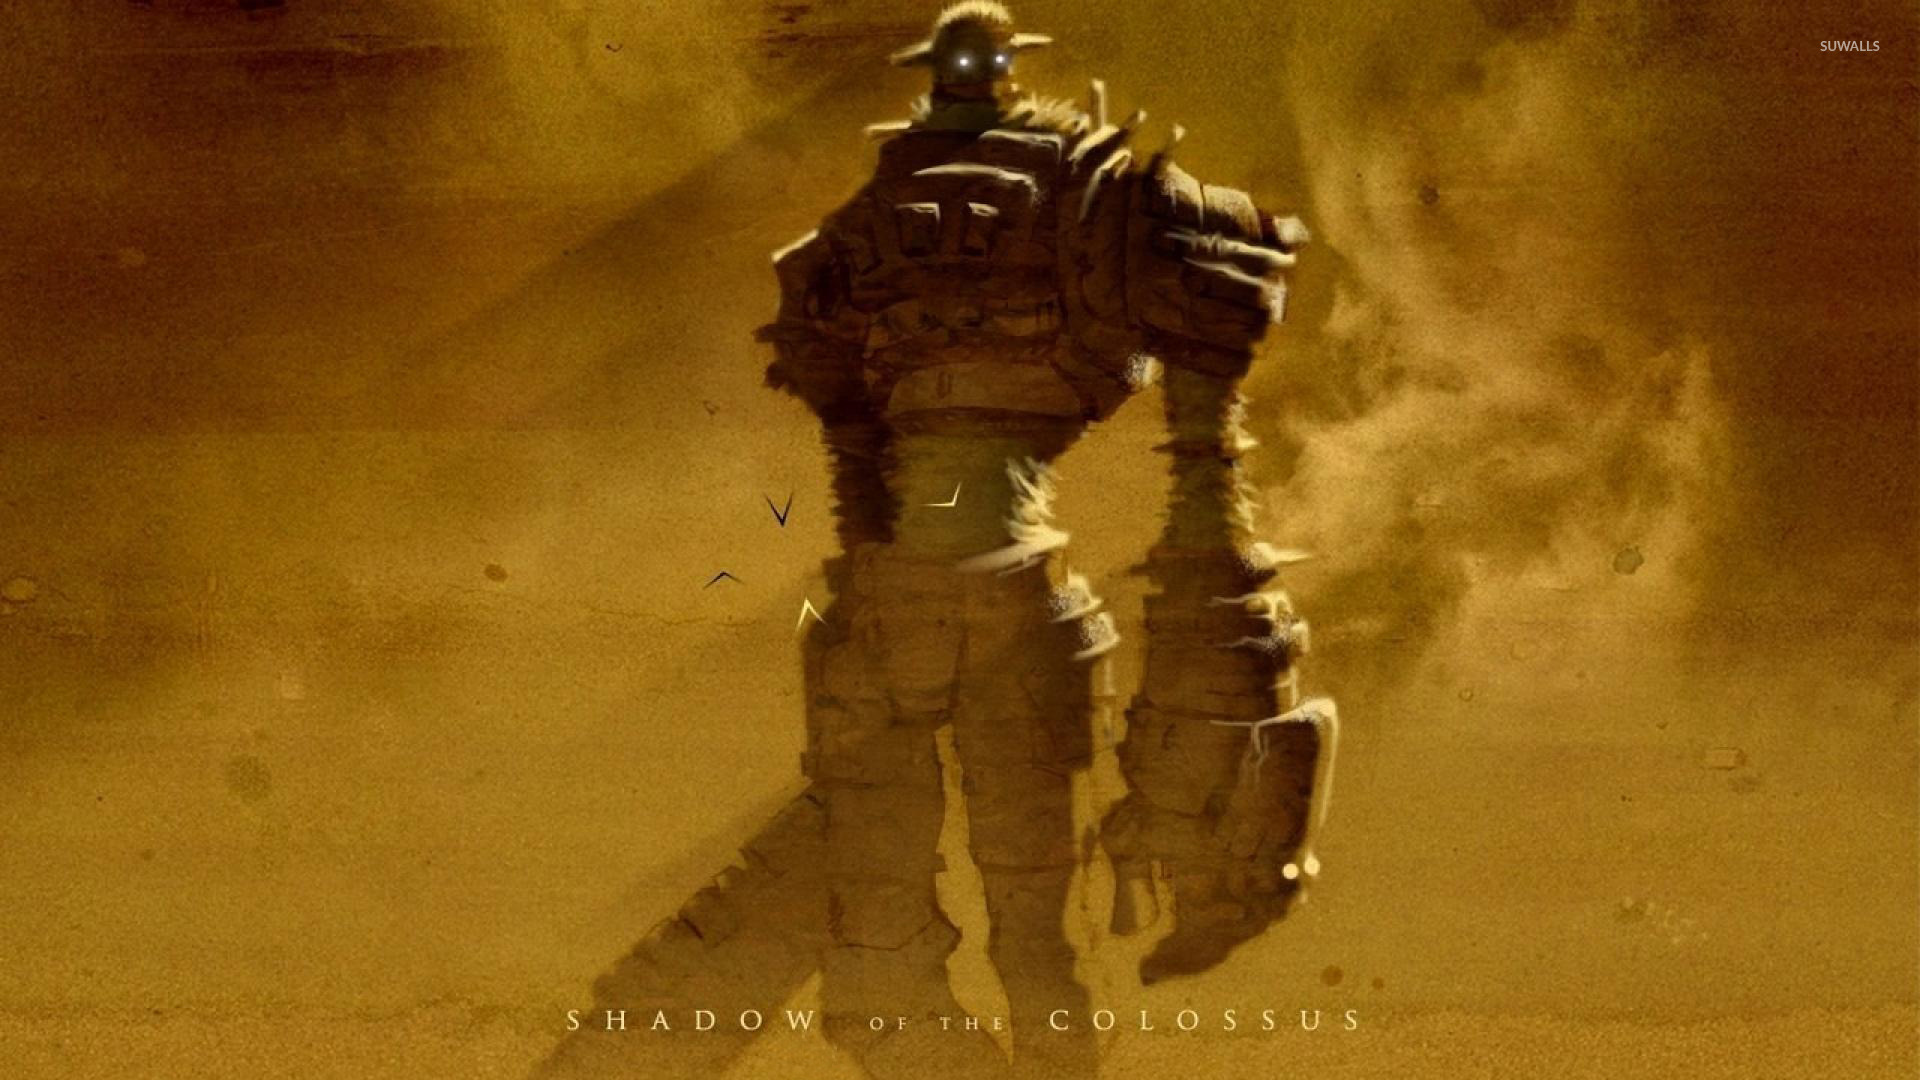 Shadow of the Colossus [4] wallpaper - Game wallpapers - #22931